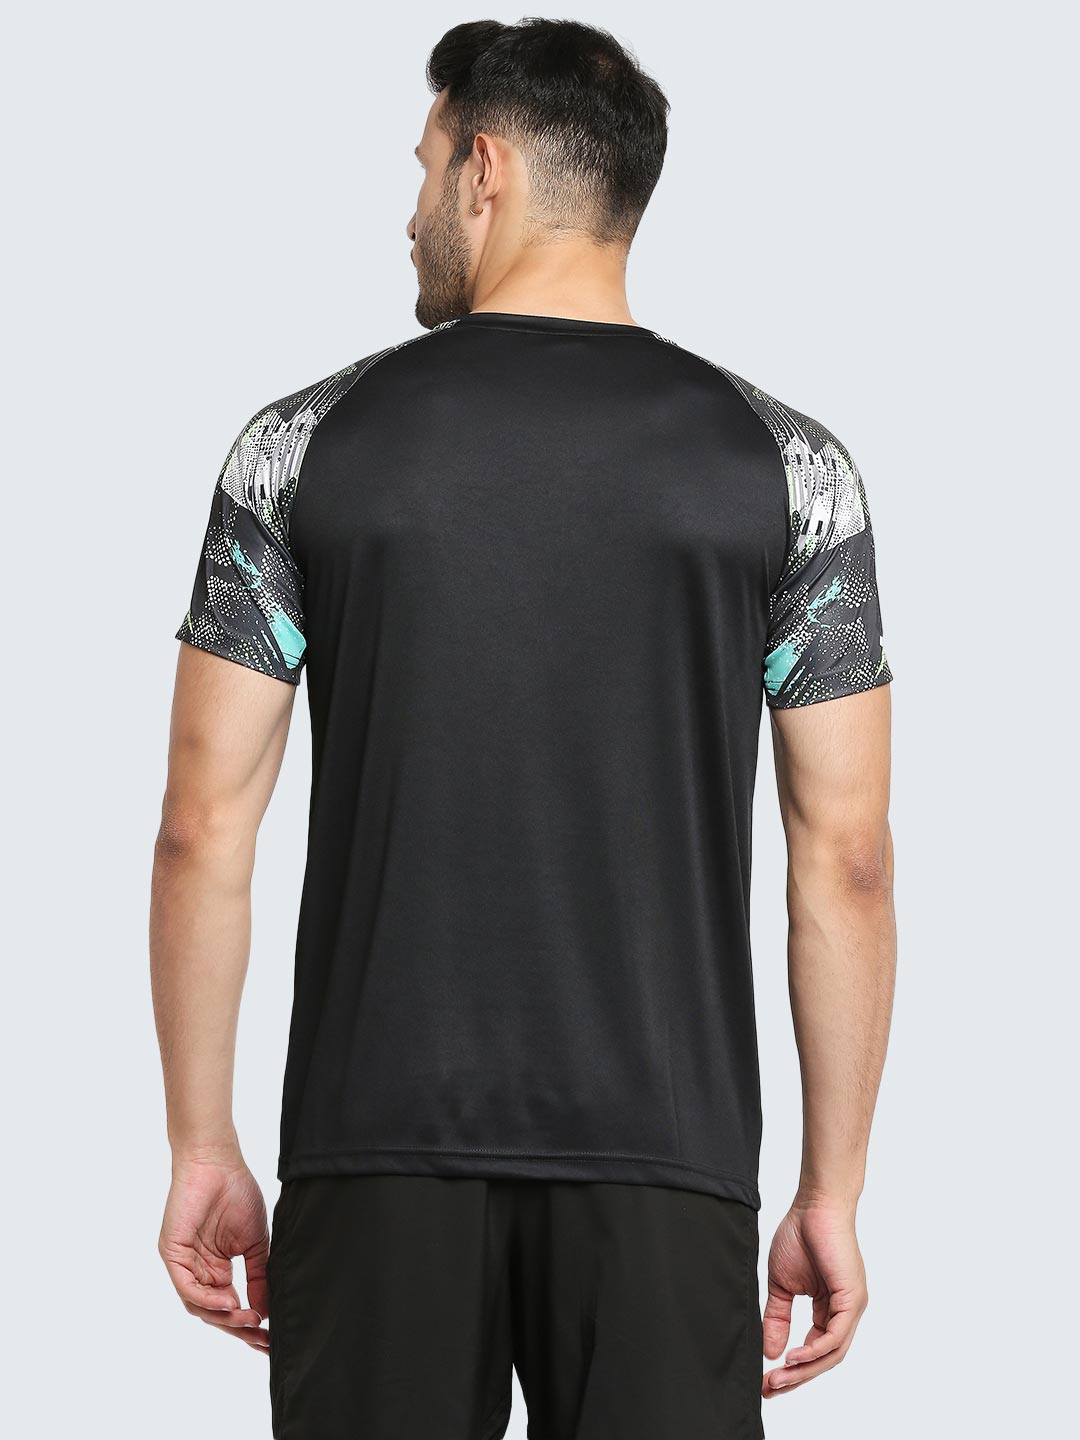 Men's Abstract Active Sports T-Shirt: Black